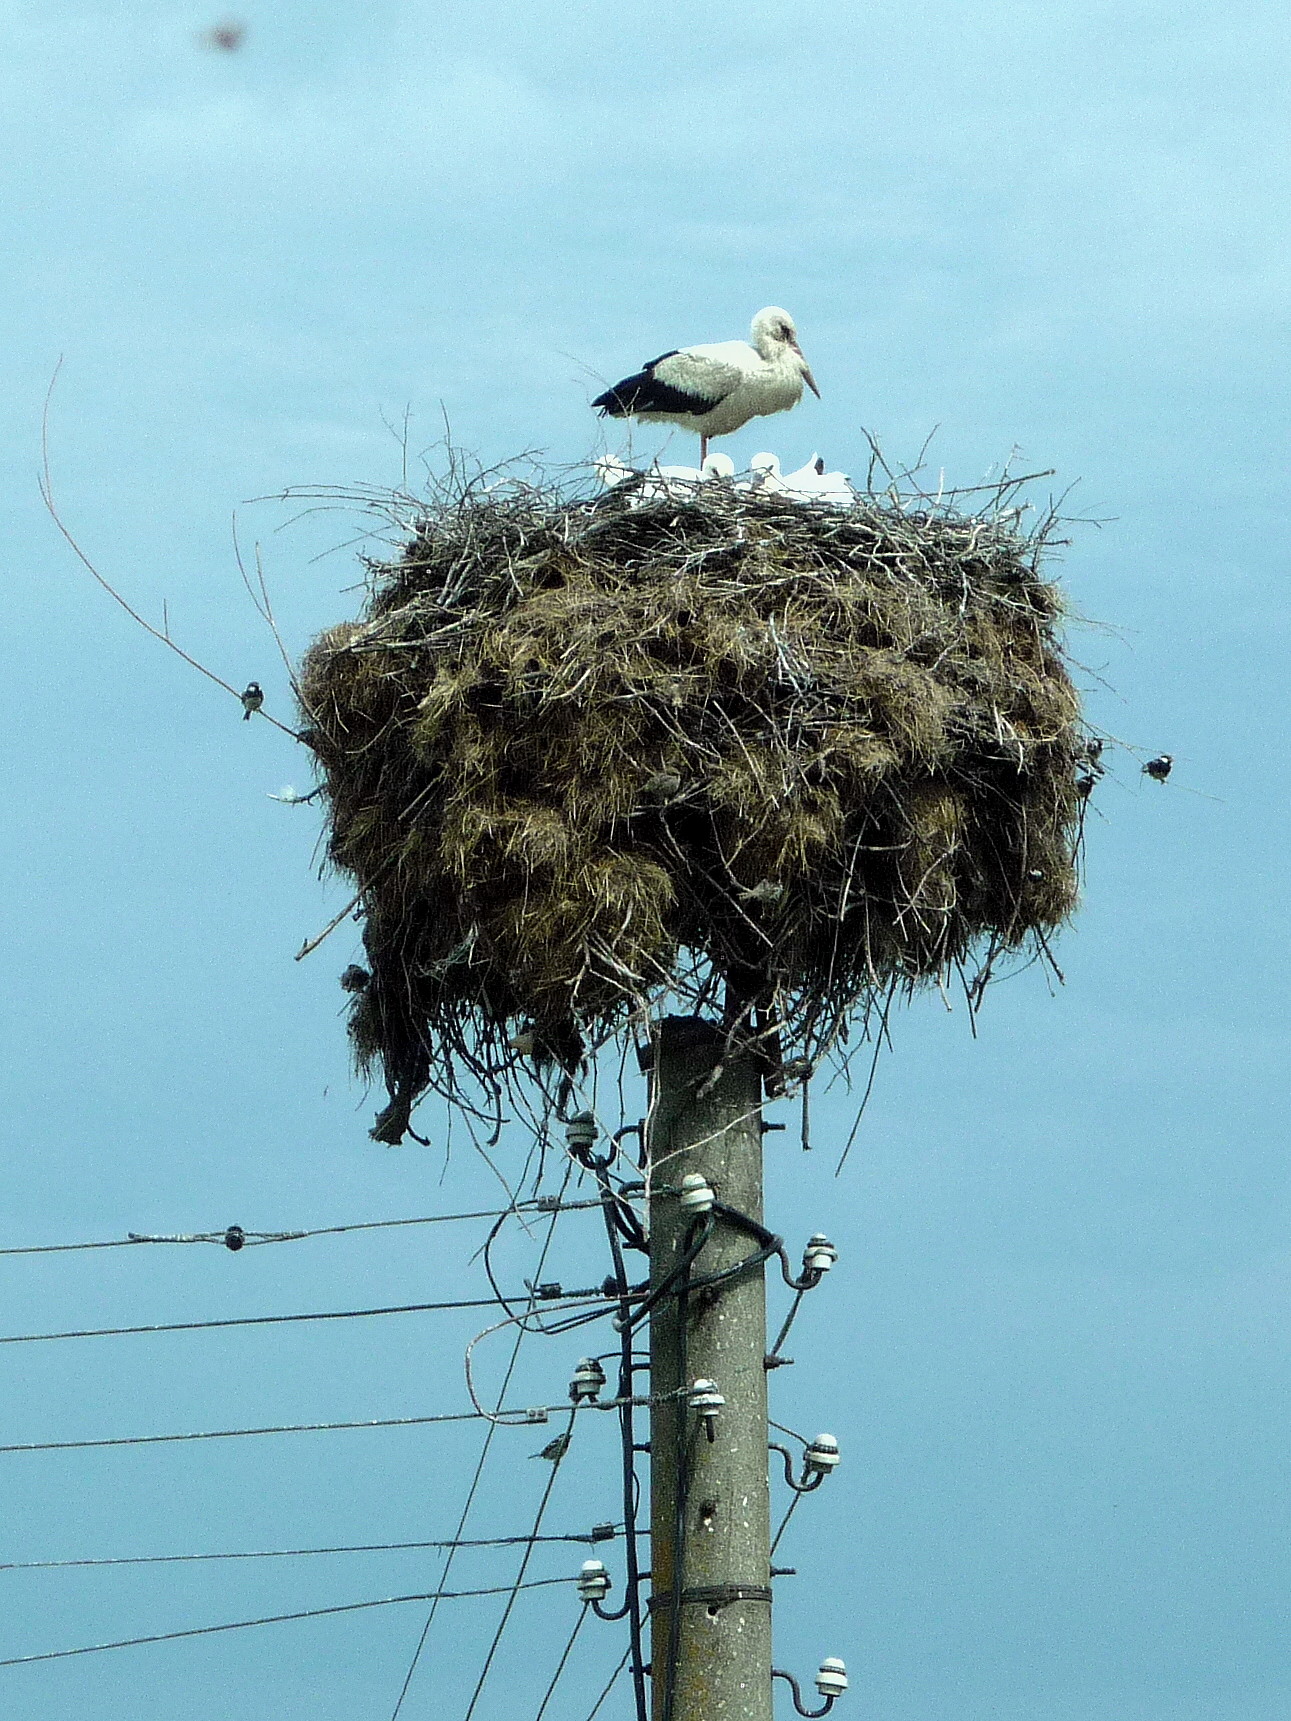 Storks Have a Special Significance to Bulgarians and are Welcomed in Their Villages